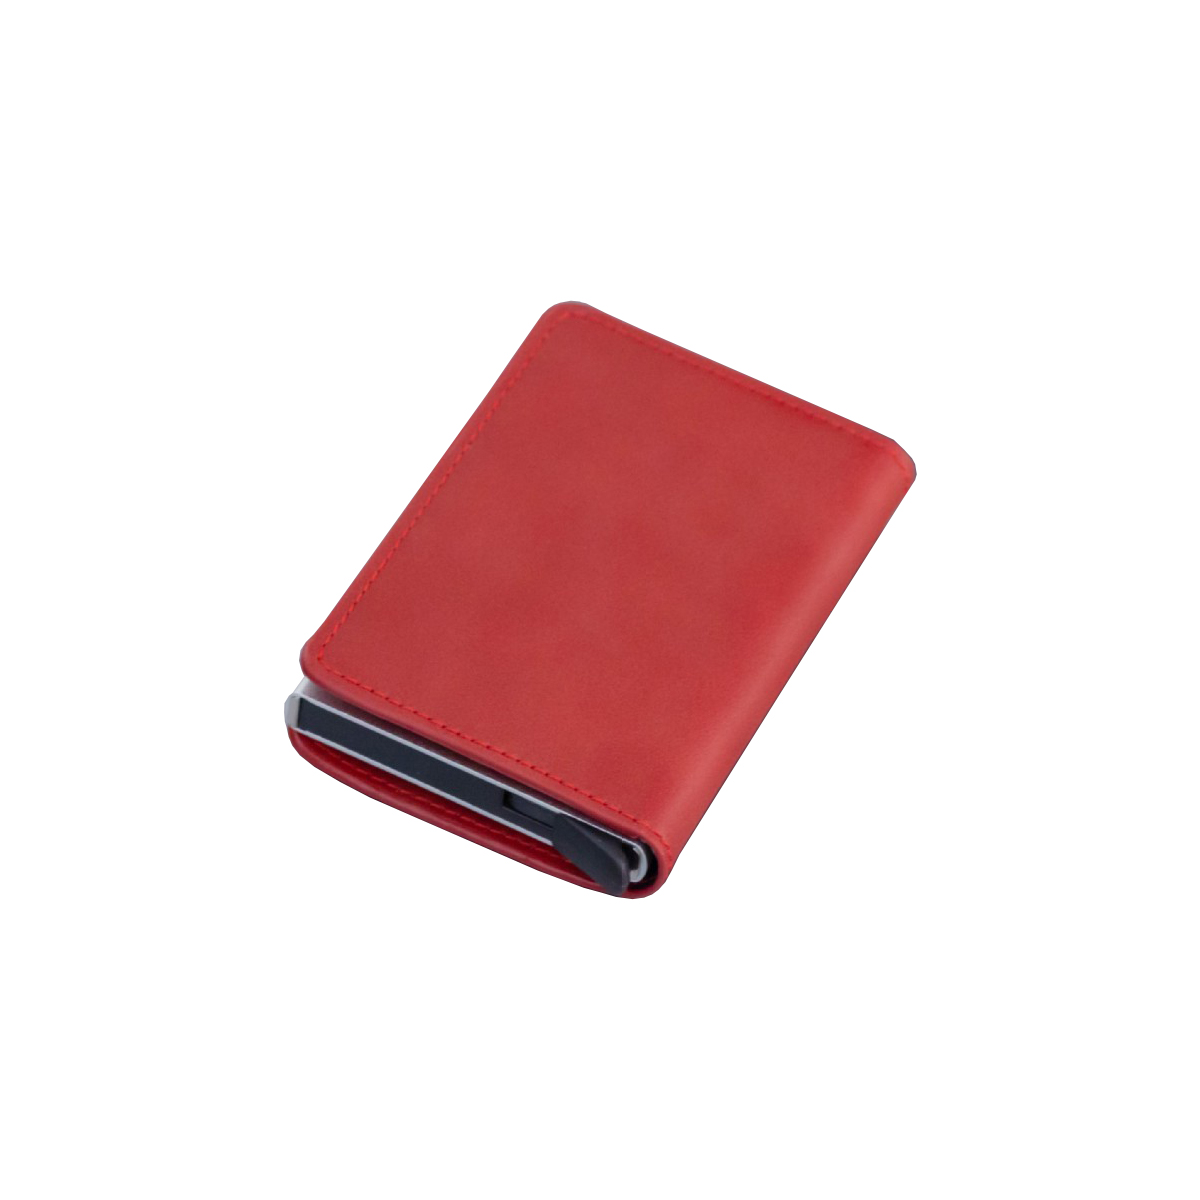 Credit Card Holder with RFID Slim Block in PU Leather and Aluminum